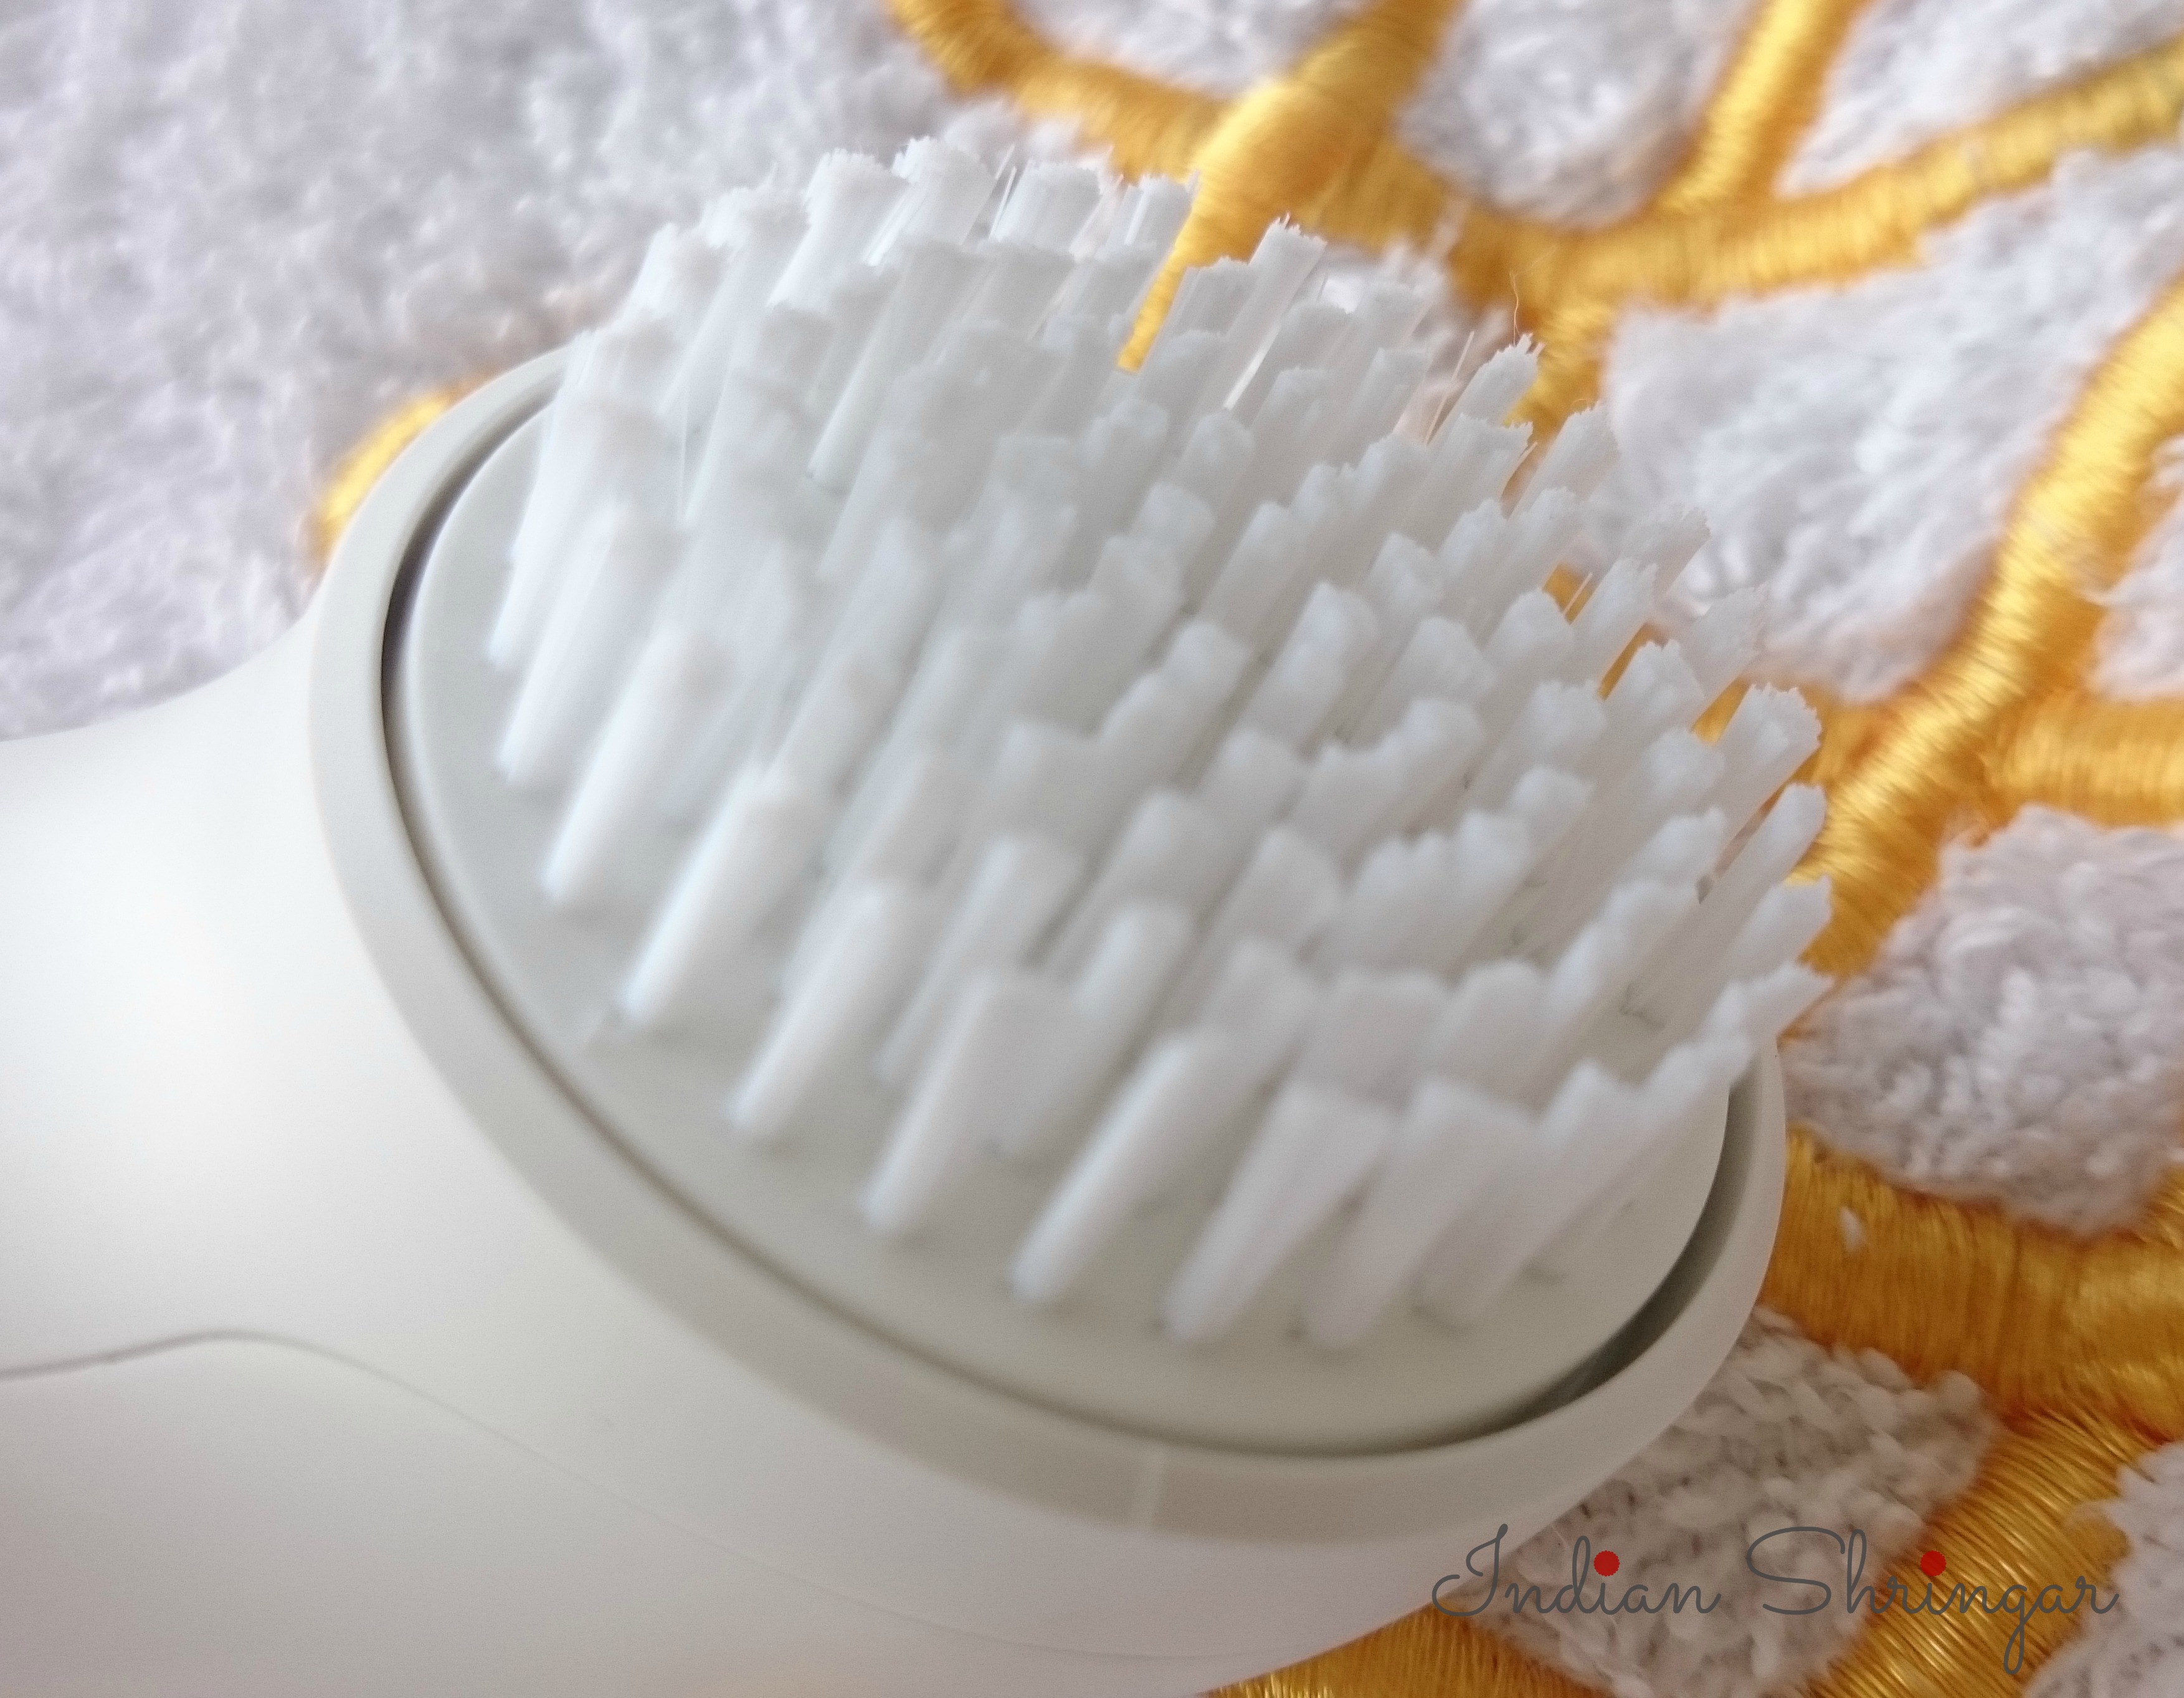 Braun Face Mini Epilator and Cleansing Brush Review